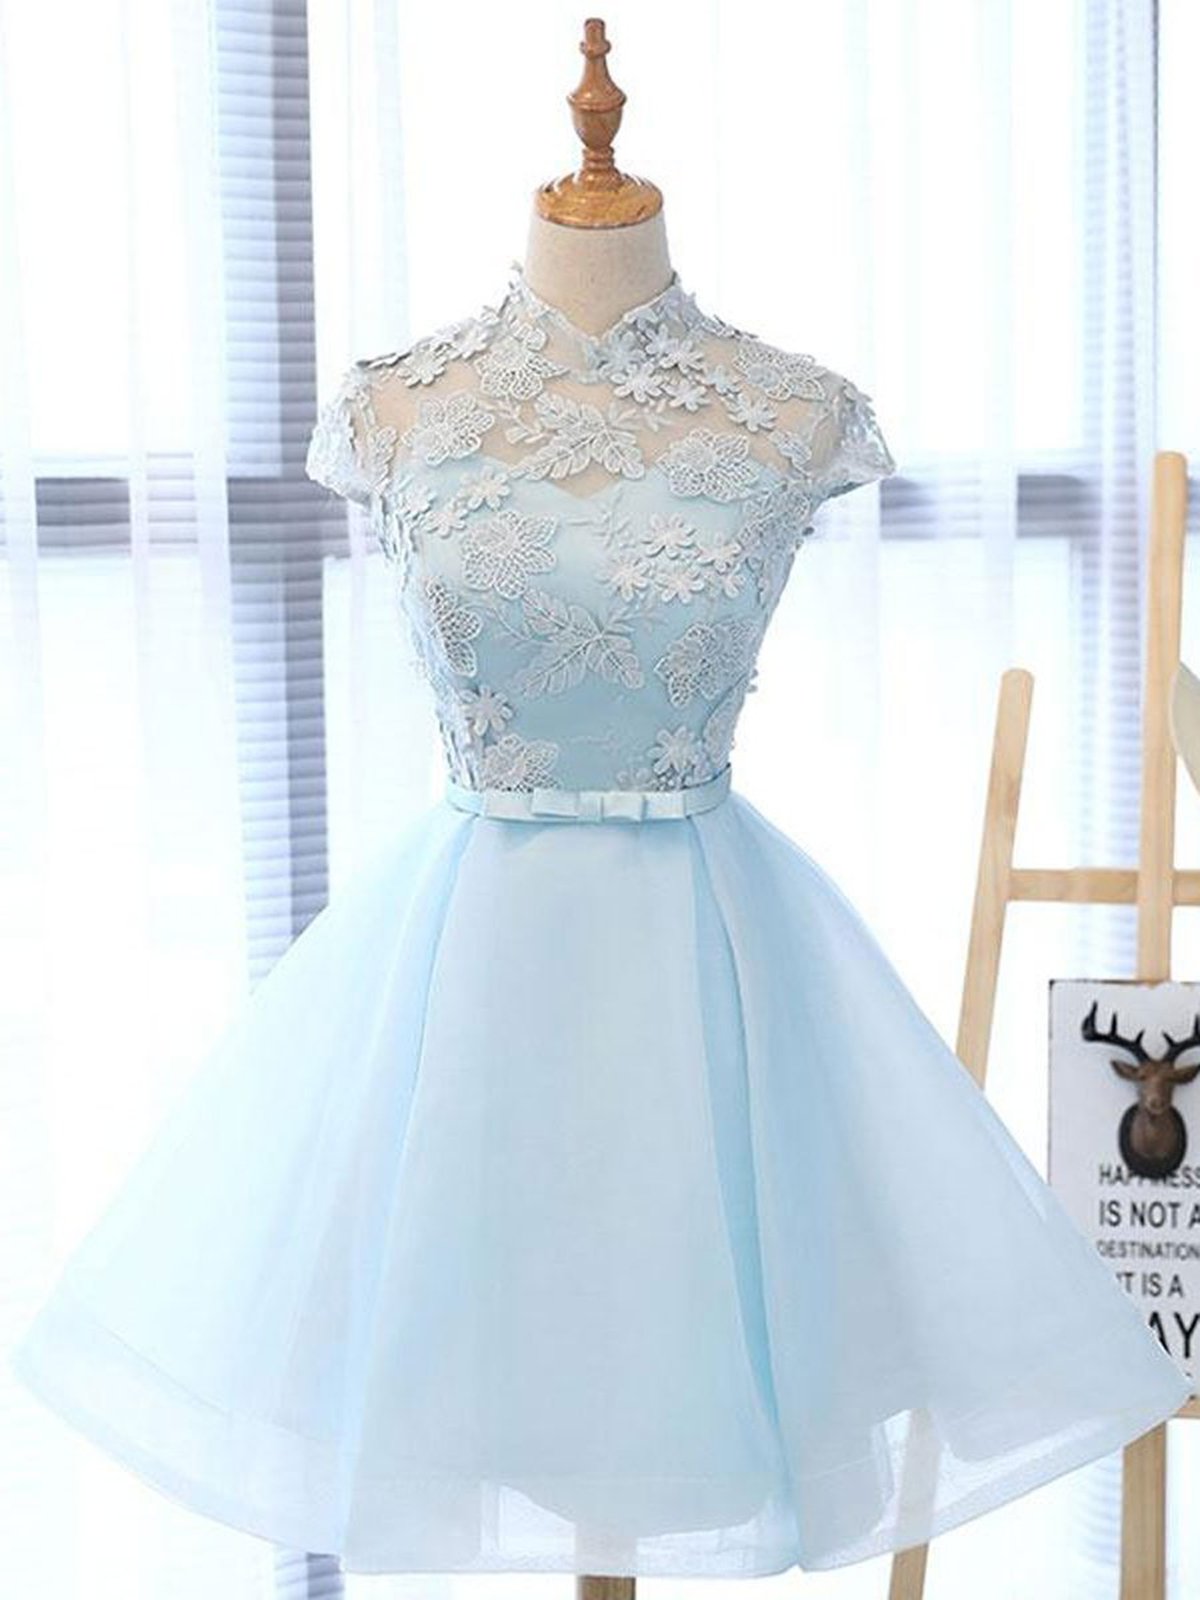 High Neck Short Blue Lace Corset Prom Dresses, Short Blue Lace Graduation Corset Homecoming Dresses outfit, Gown